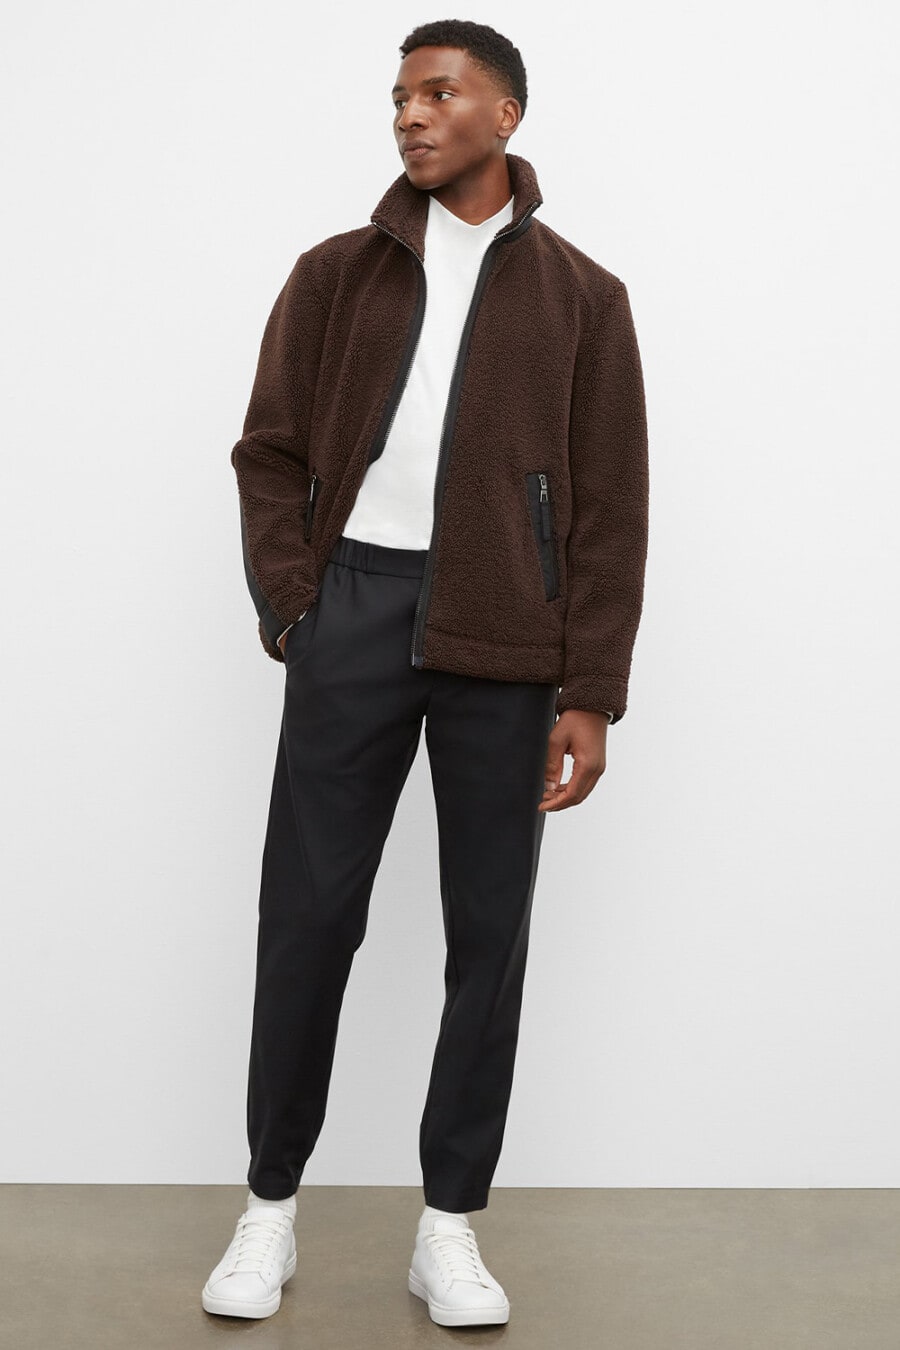 Men's black drawstring pants, tucked in white T-shirt, brown fleece jacket and white leather sneakers outfit